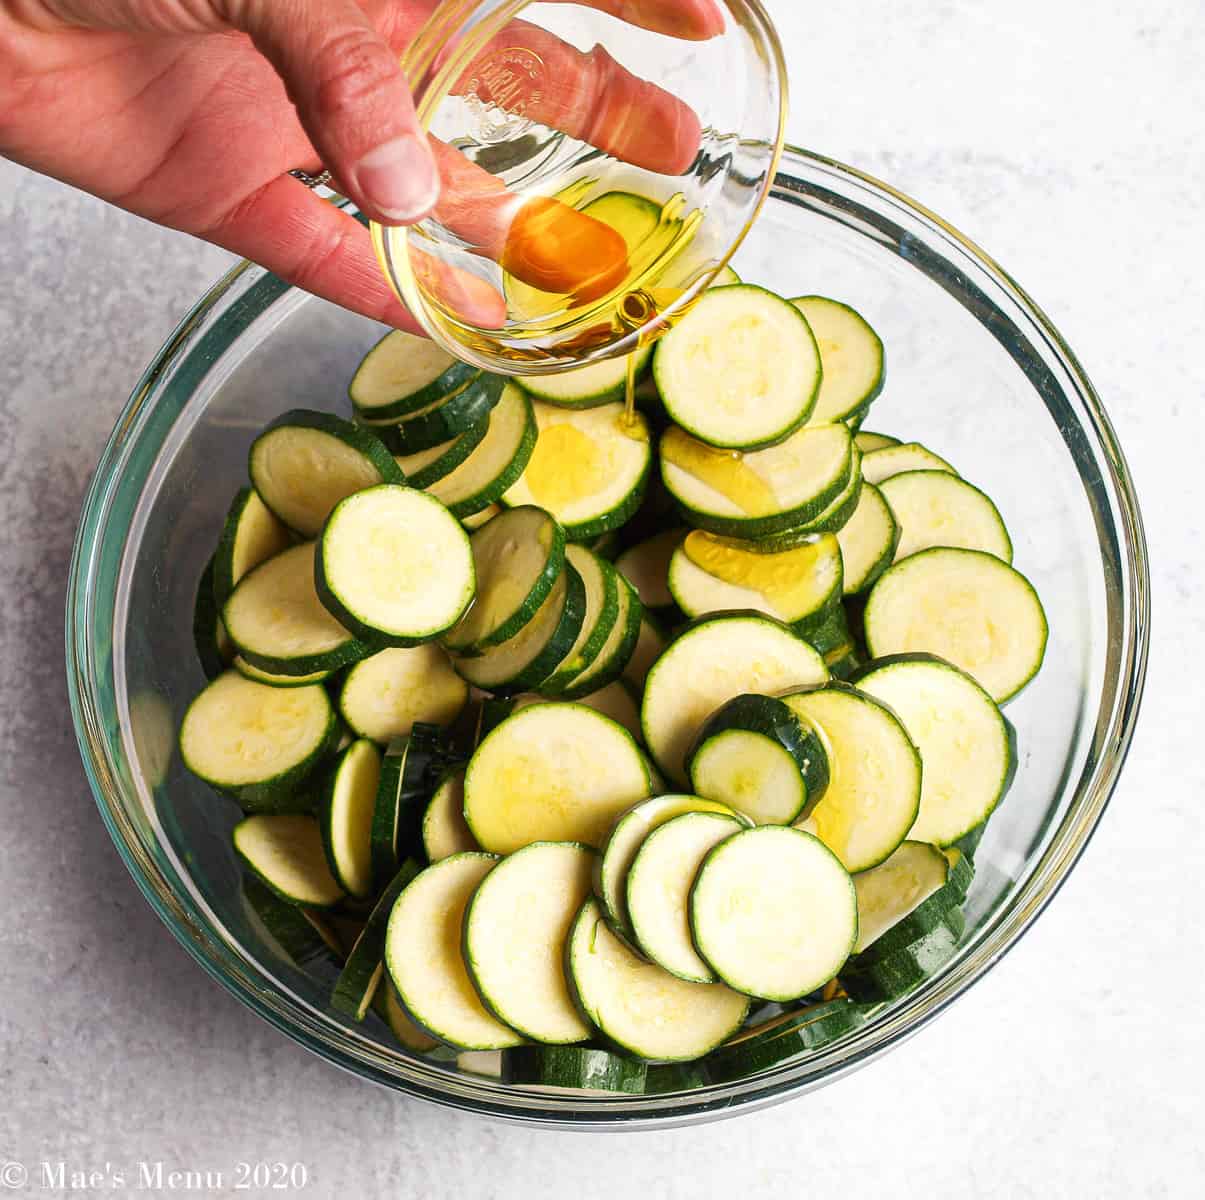 Pouring oil over a glass mixing bowl of zucchini coins